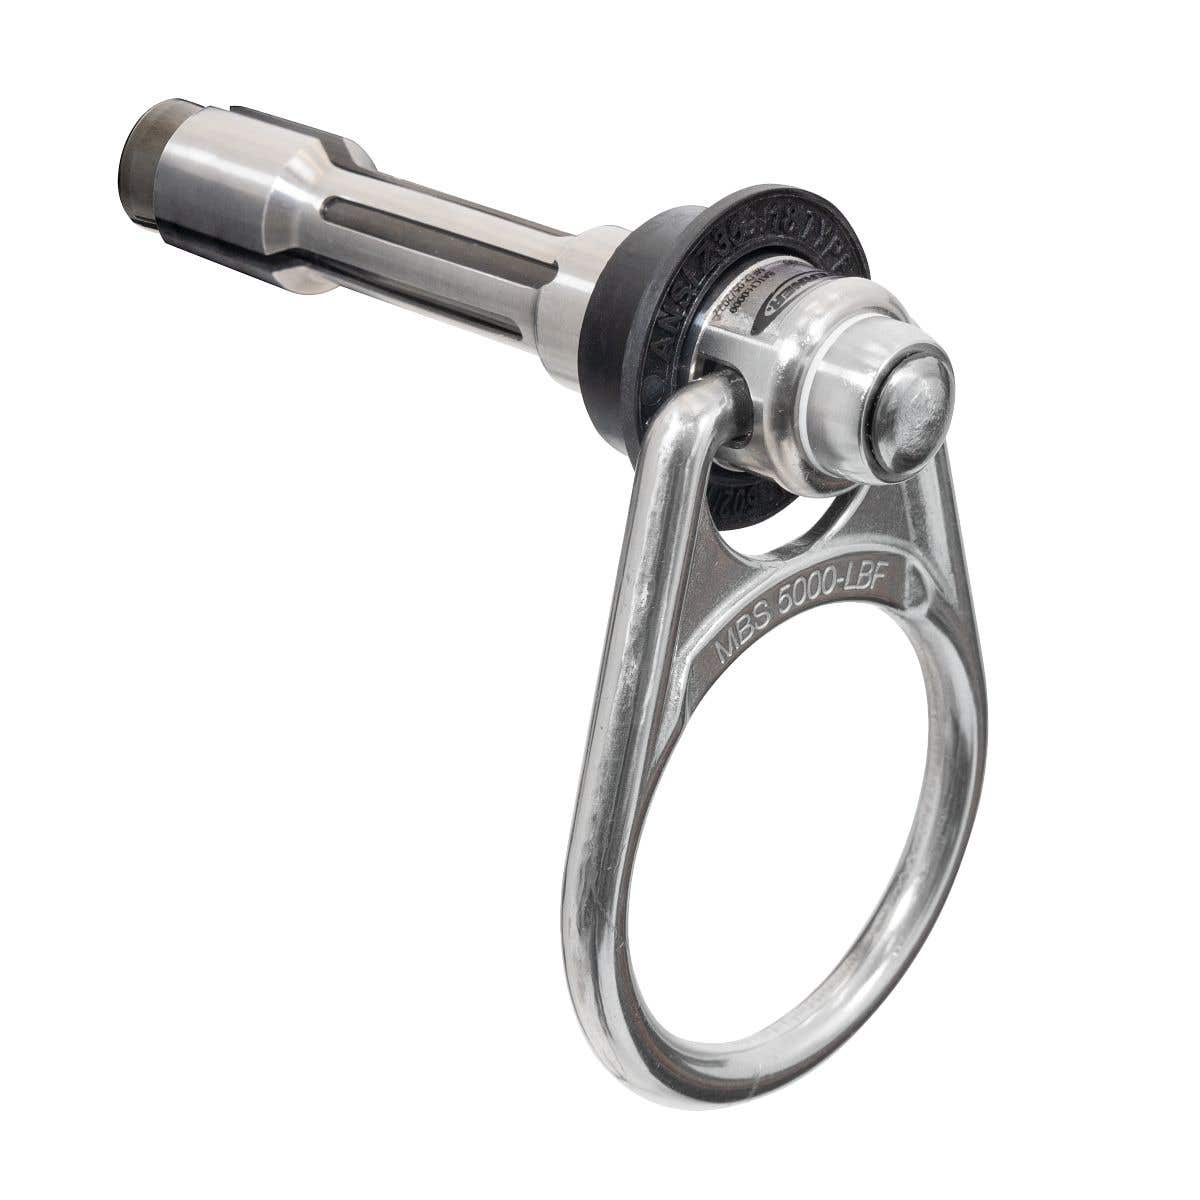 A510300 R3 5K Reusable Omni-Directional D-Ring Concrete Anchor with Quick Release, Anchor Size 7.5(L) x 2.68(W) with 2 Connection, Rated for 5,000 lb Minimum Breaking Strength, Stainless Steel